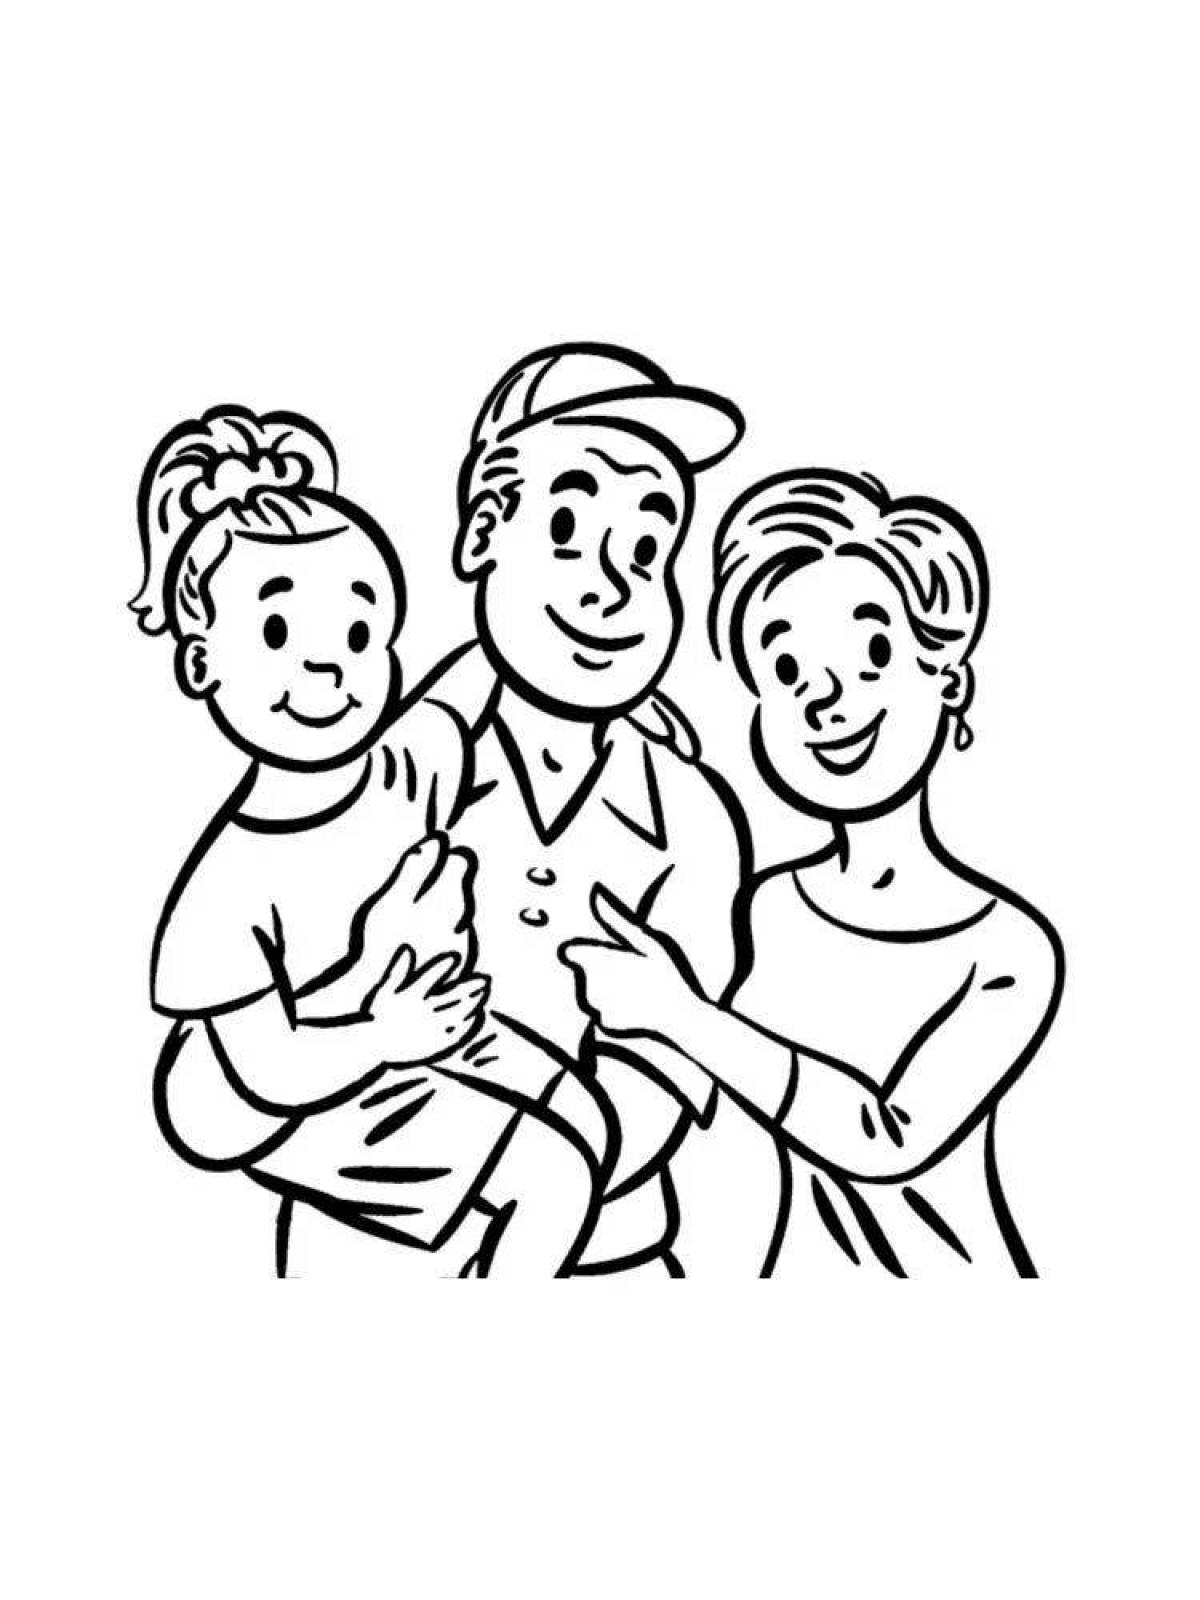 Fun family coloring picture